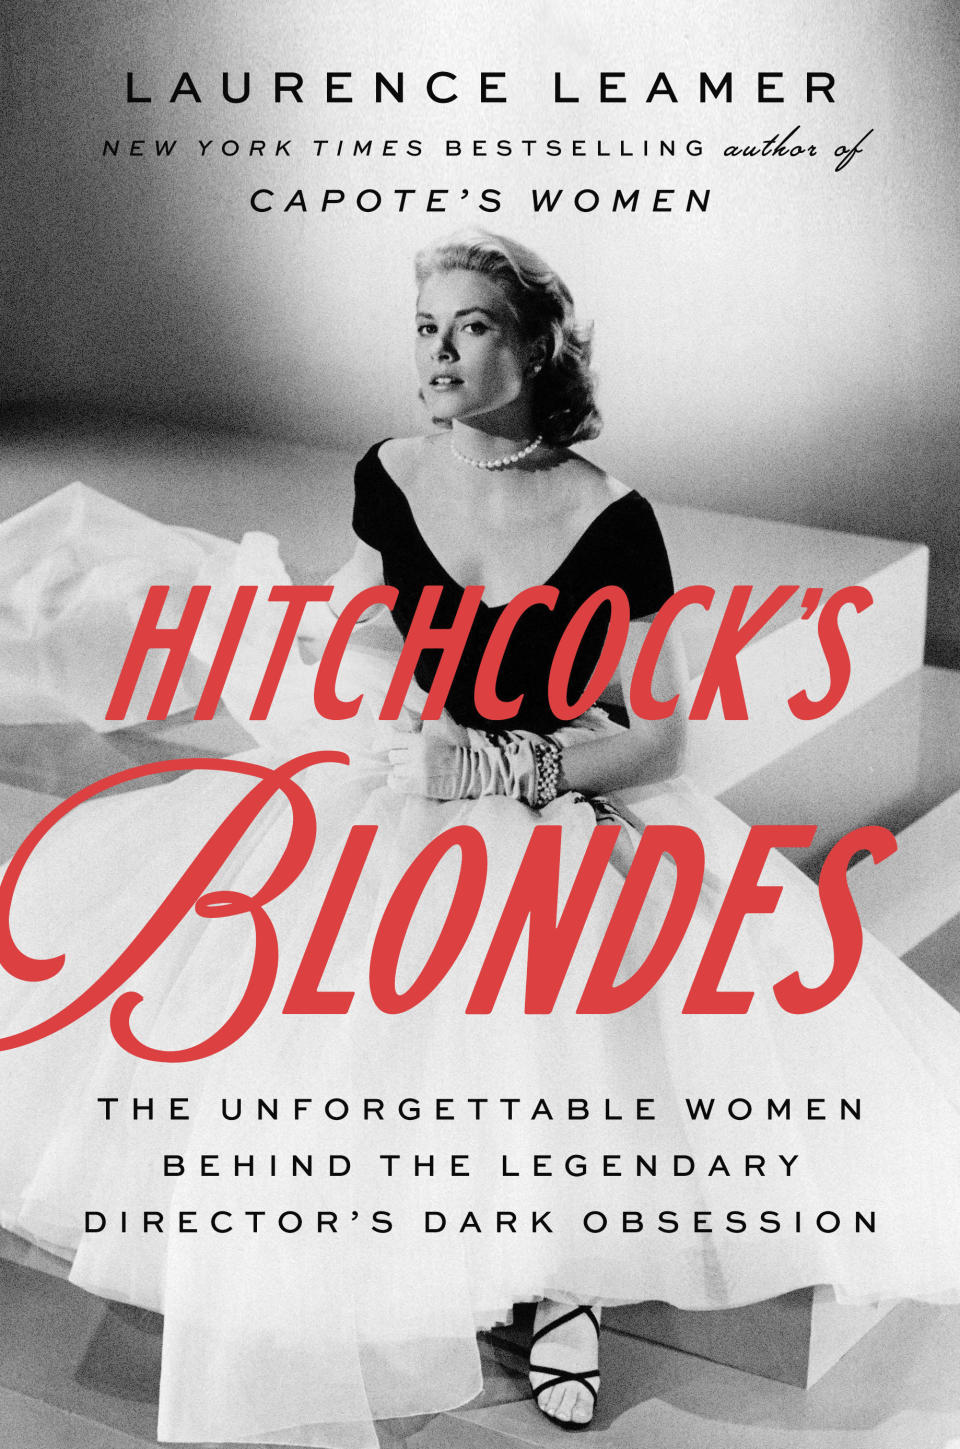 This cover image released by Putnam shows "Hitchcock’s Blondes: The Unforgettable Women Behind the Legendary Director’s Dark Obsession" by Laurence Leamer. (Putnam via AP)